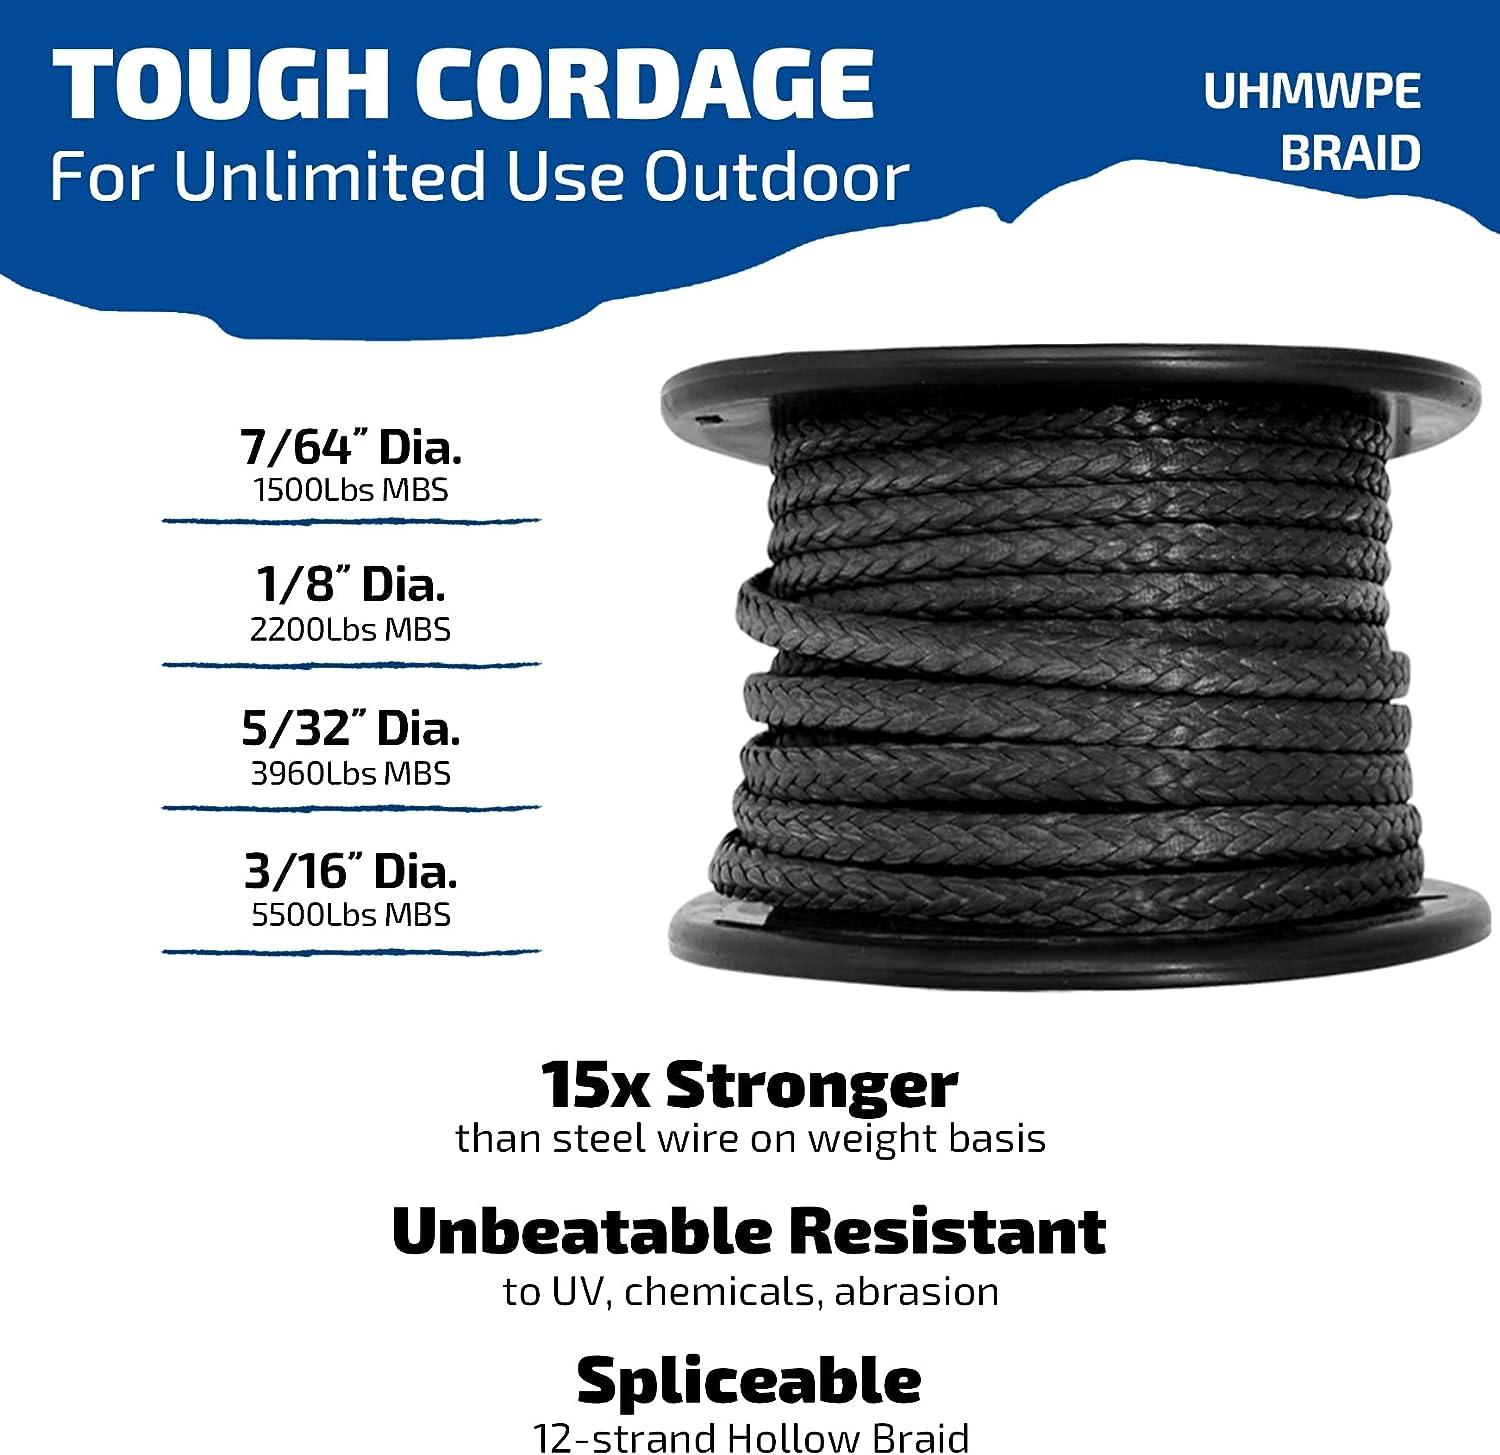 emma kites 100% UHMWPE Braided Cord 7/643/16(Dia.) Heavy Duty Abrasion  Resist. Low Stretch Utility Cord for Kites Surfing Whoopie Rigging  Spearfishing Kayak Survival Repair, 15005500Lbs Spool 1500Lb